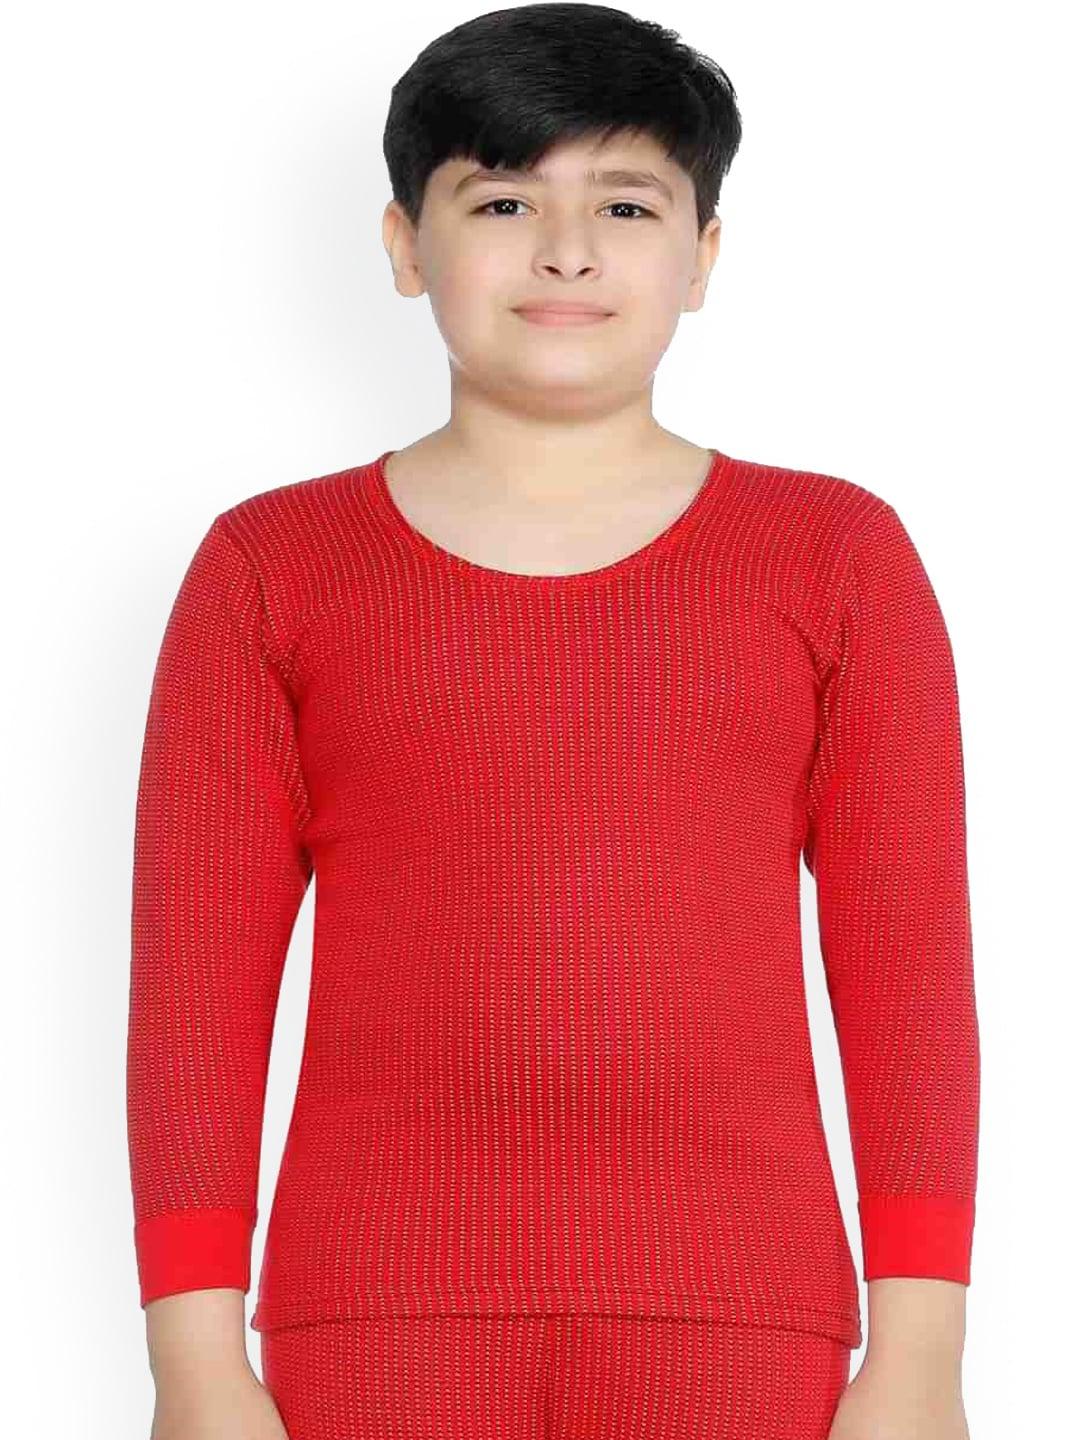 bodycare-kids-boys-red-printed-cotton-thermal-top